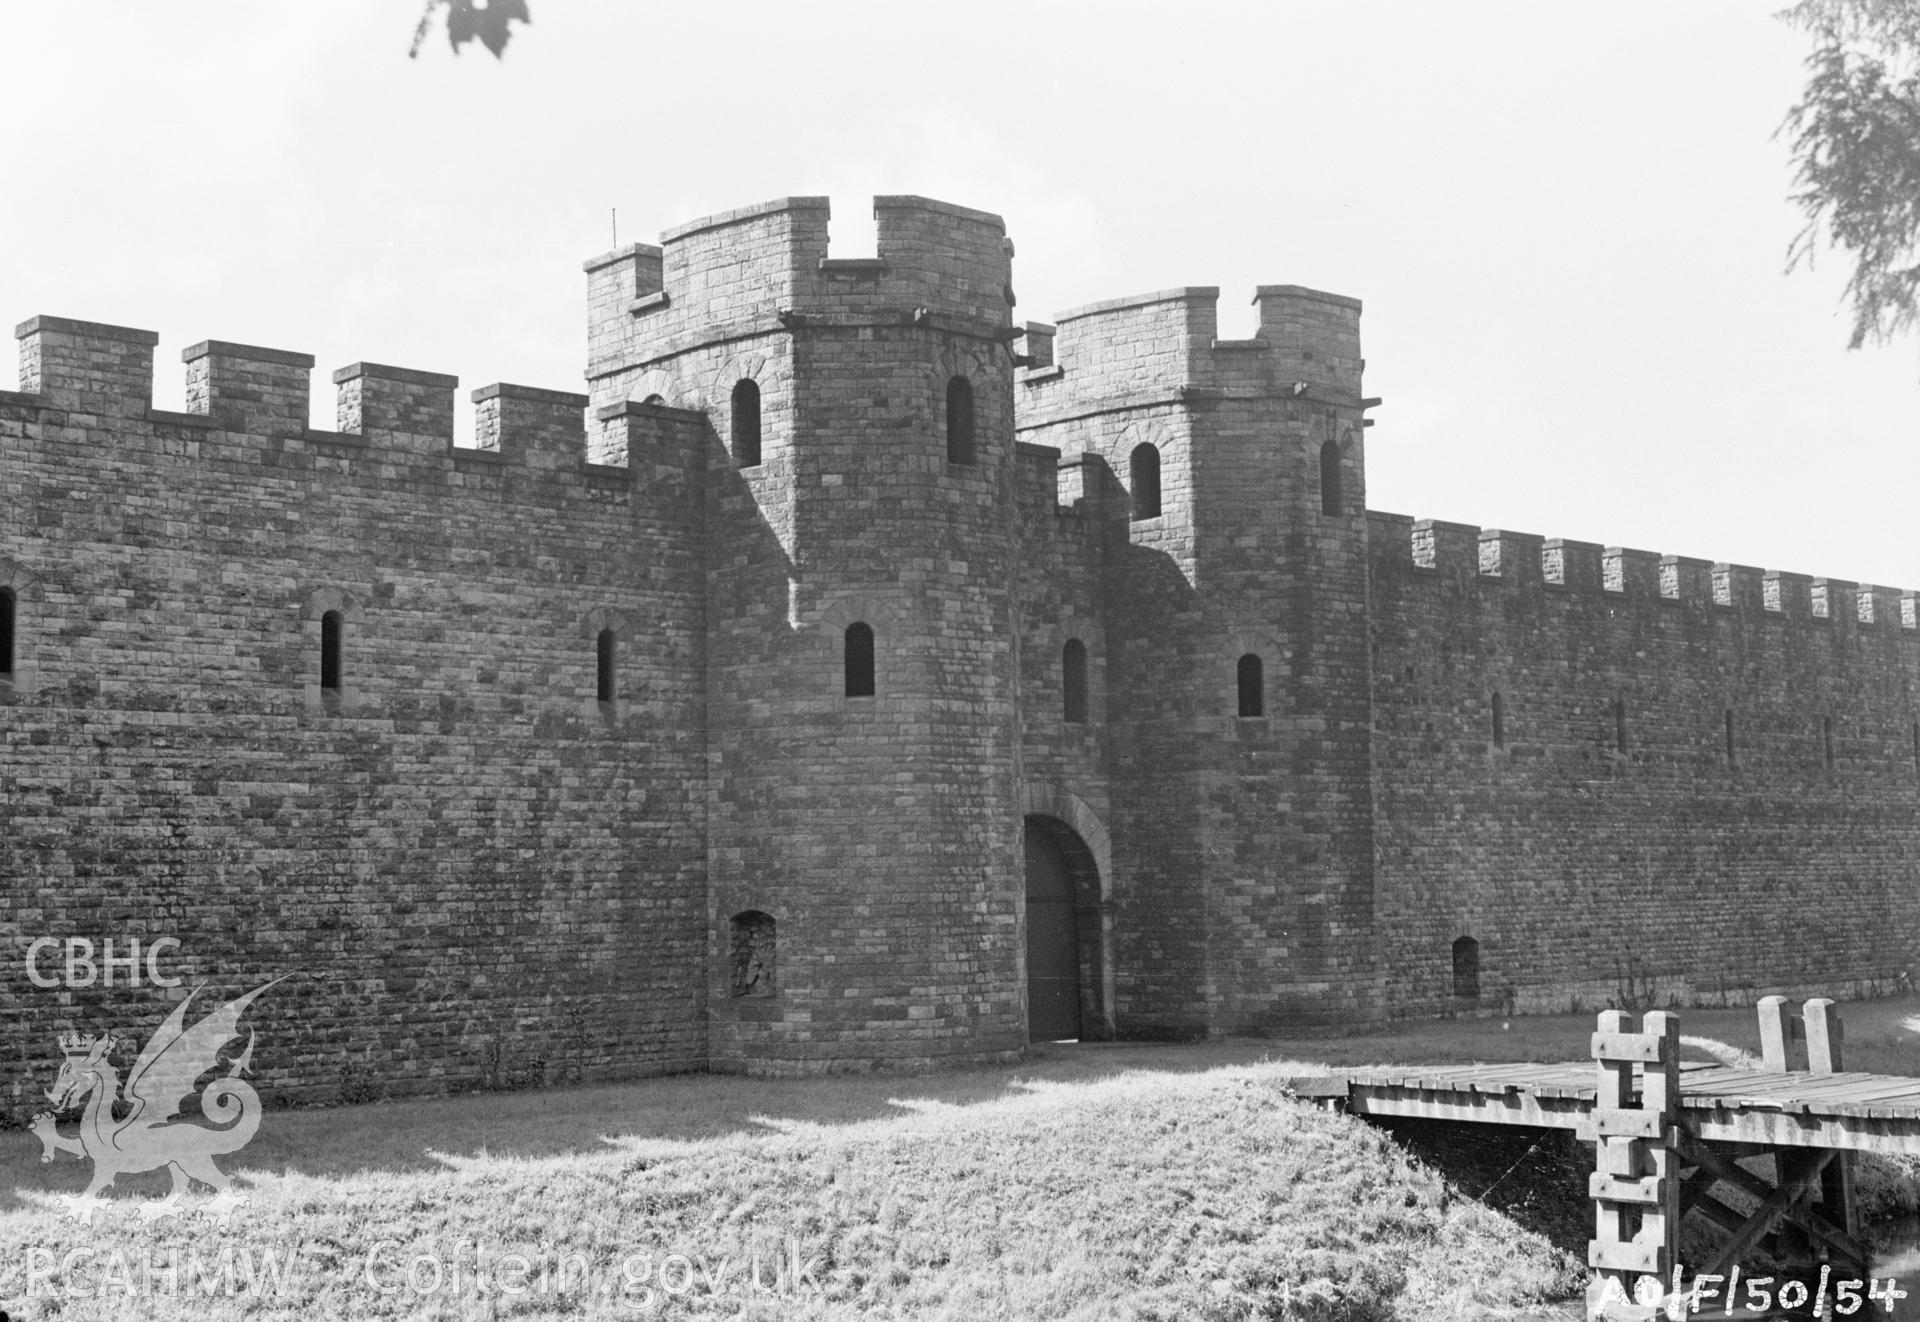 Digital copy of a nitrate negative showing a view of Cardiff Castle walls, taken by Ordnance Survey.